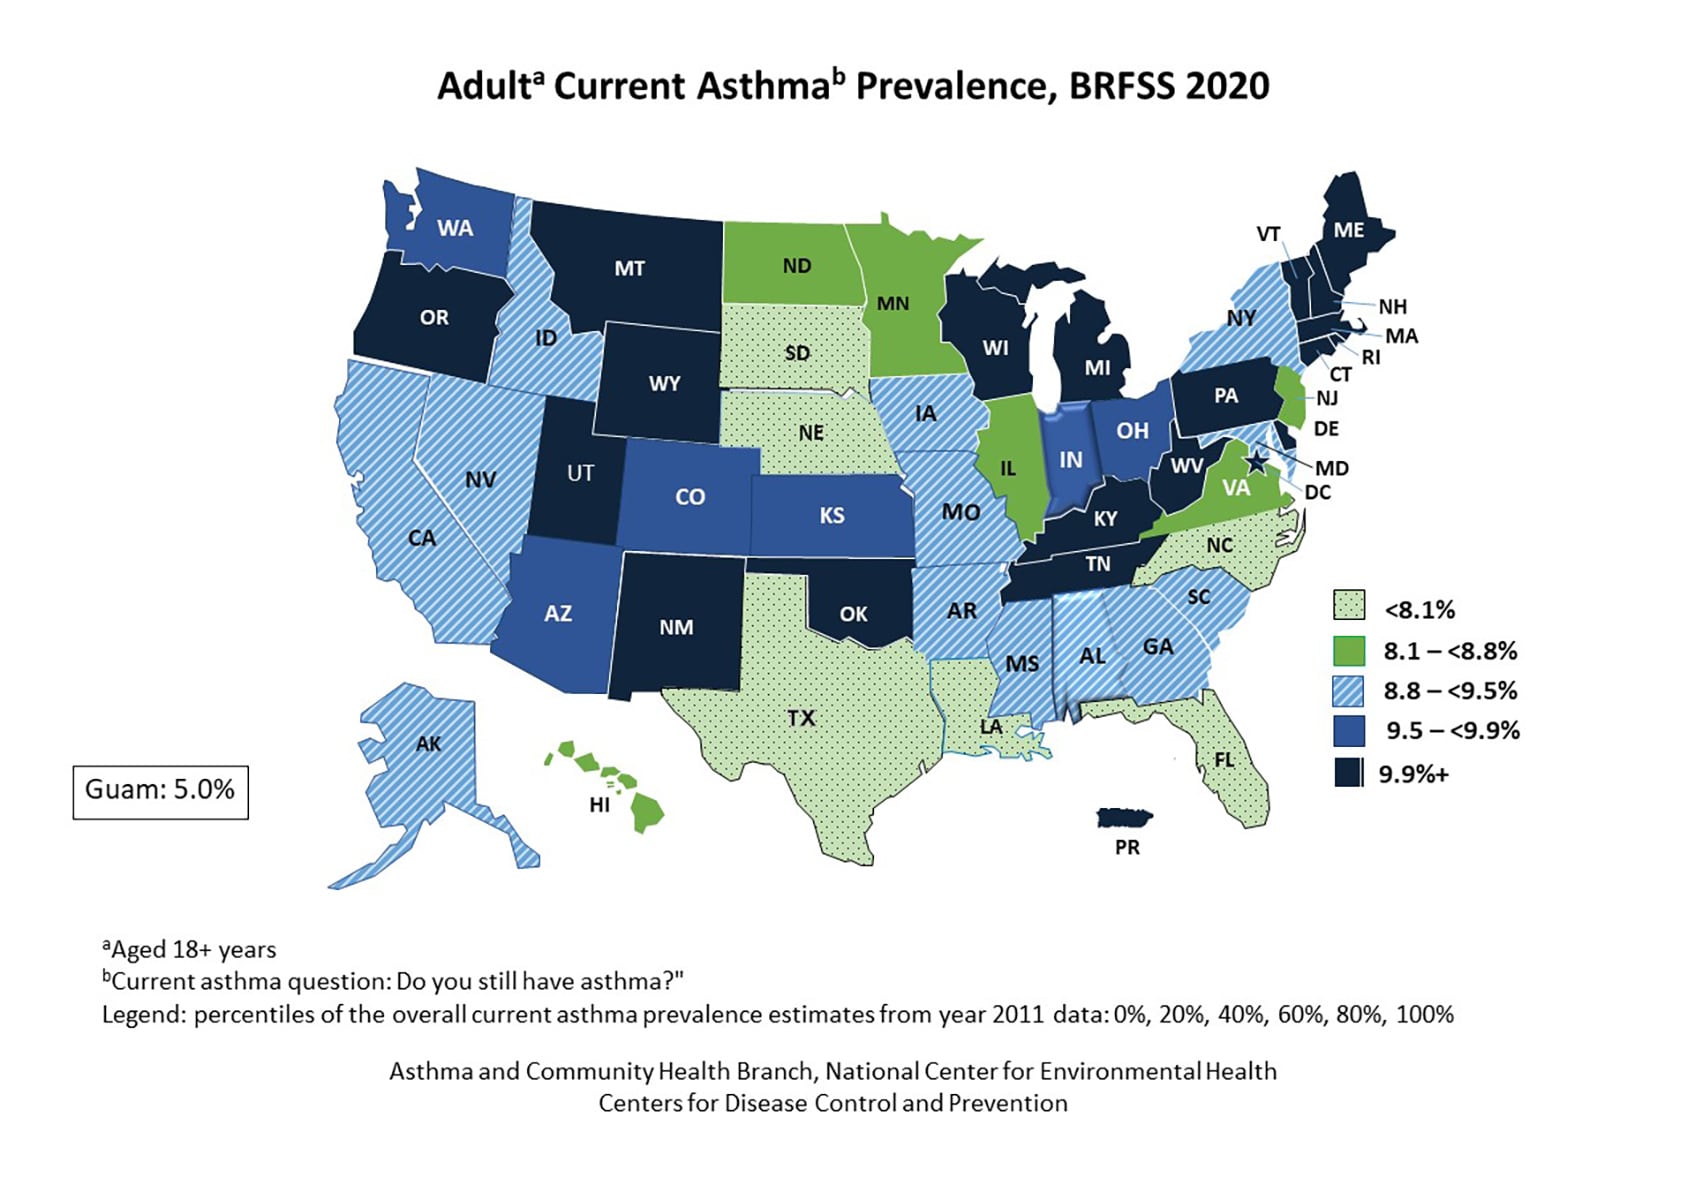 U.S. map showing adult self-reported current asthma prevalence by state for BRFSS 2020